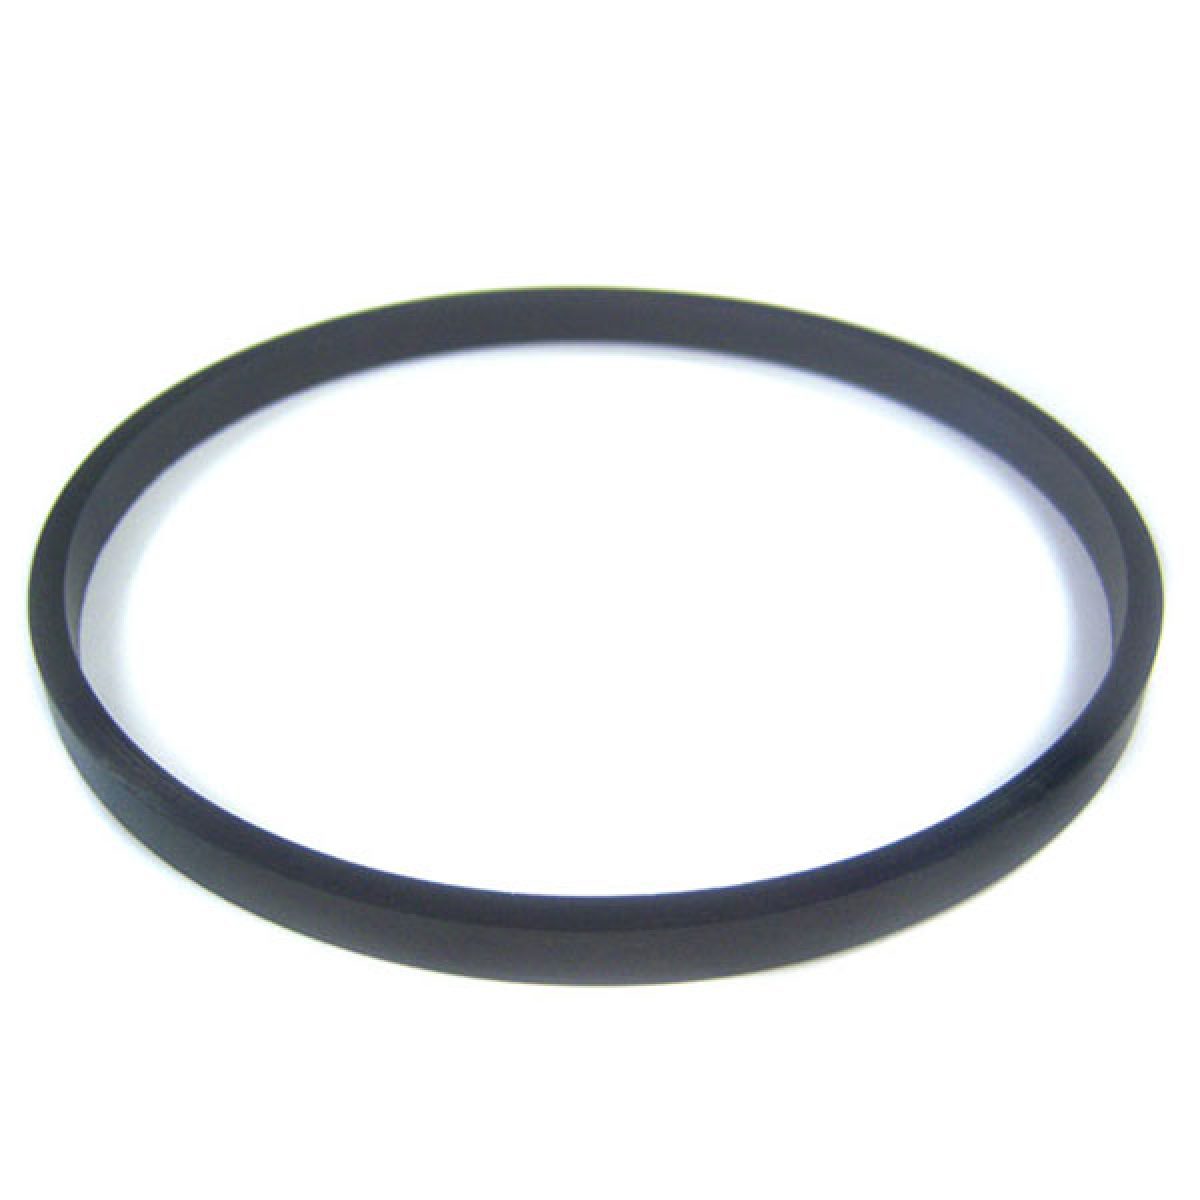 2-PACK Replacement For Hayward SPX0125T Str Cover Gasket for Max-Flo Pump